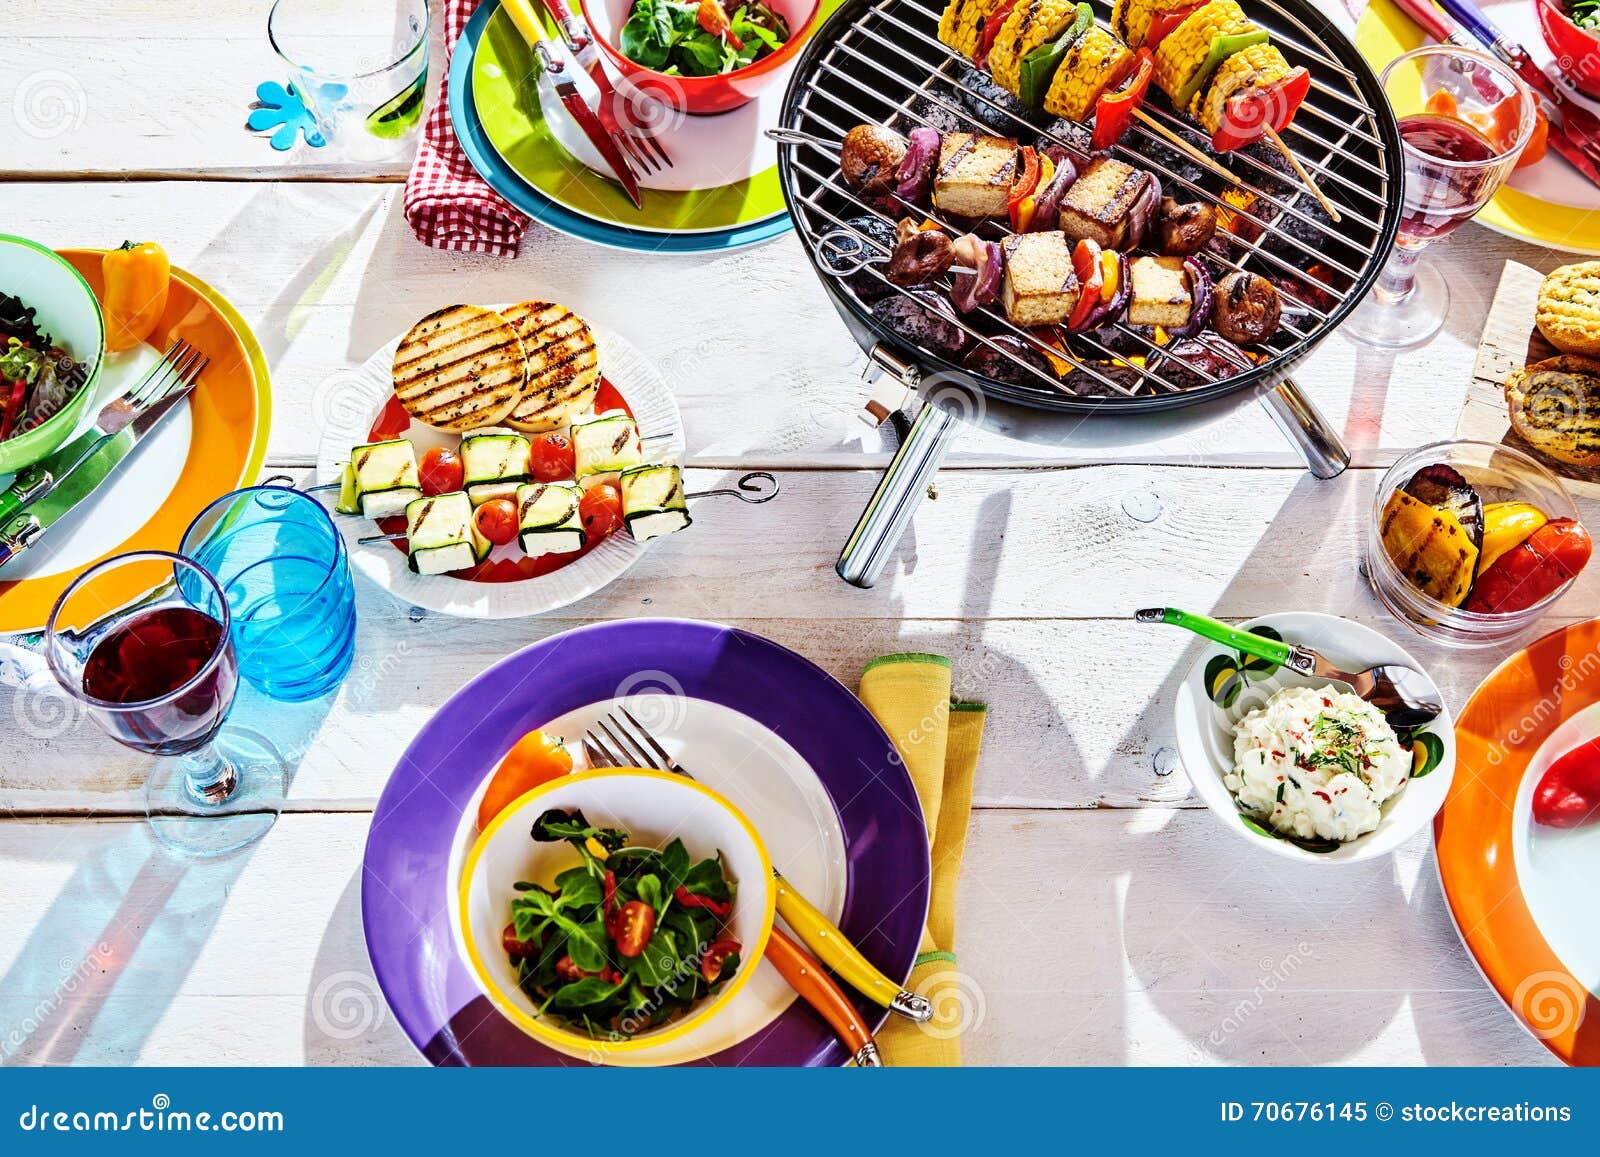 overhead well laid summer table with colorful dish and brazier